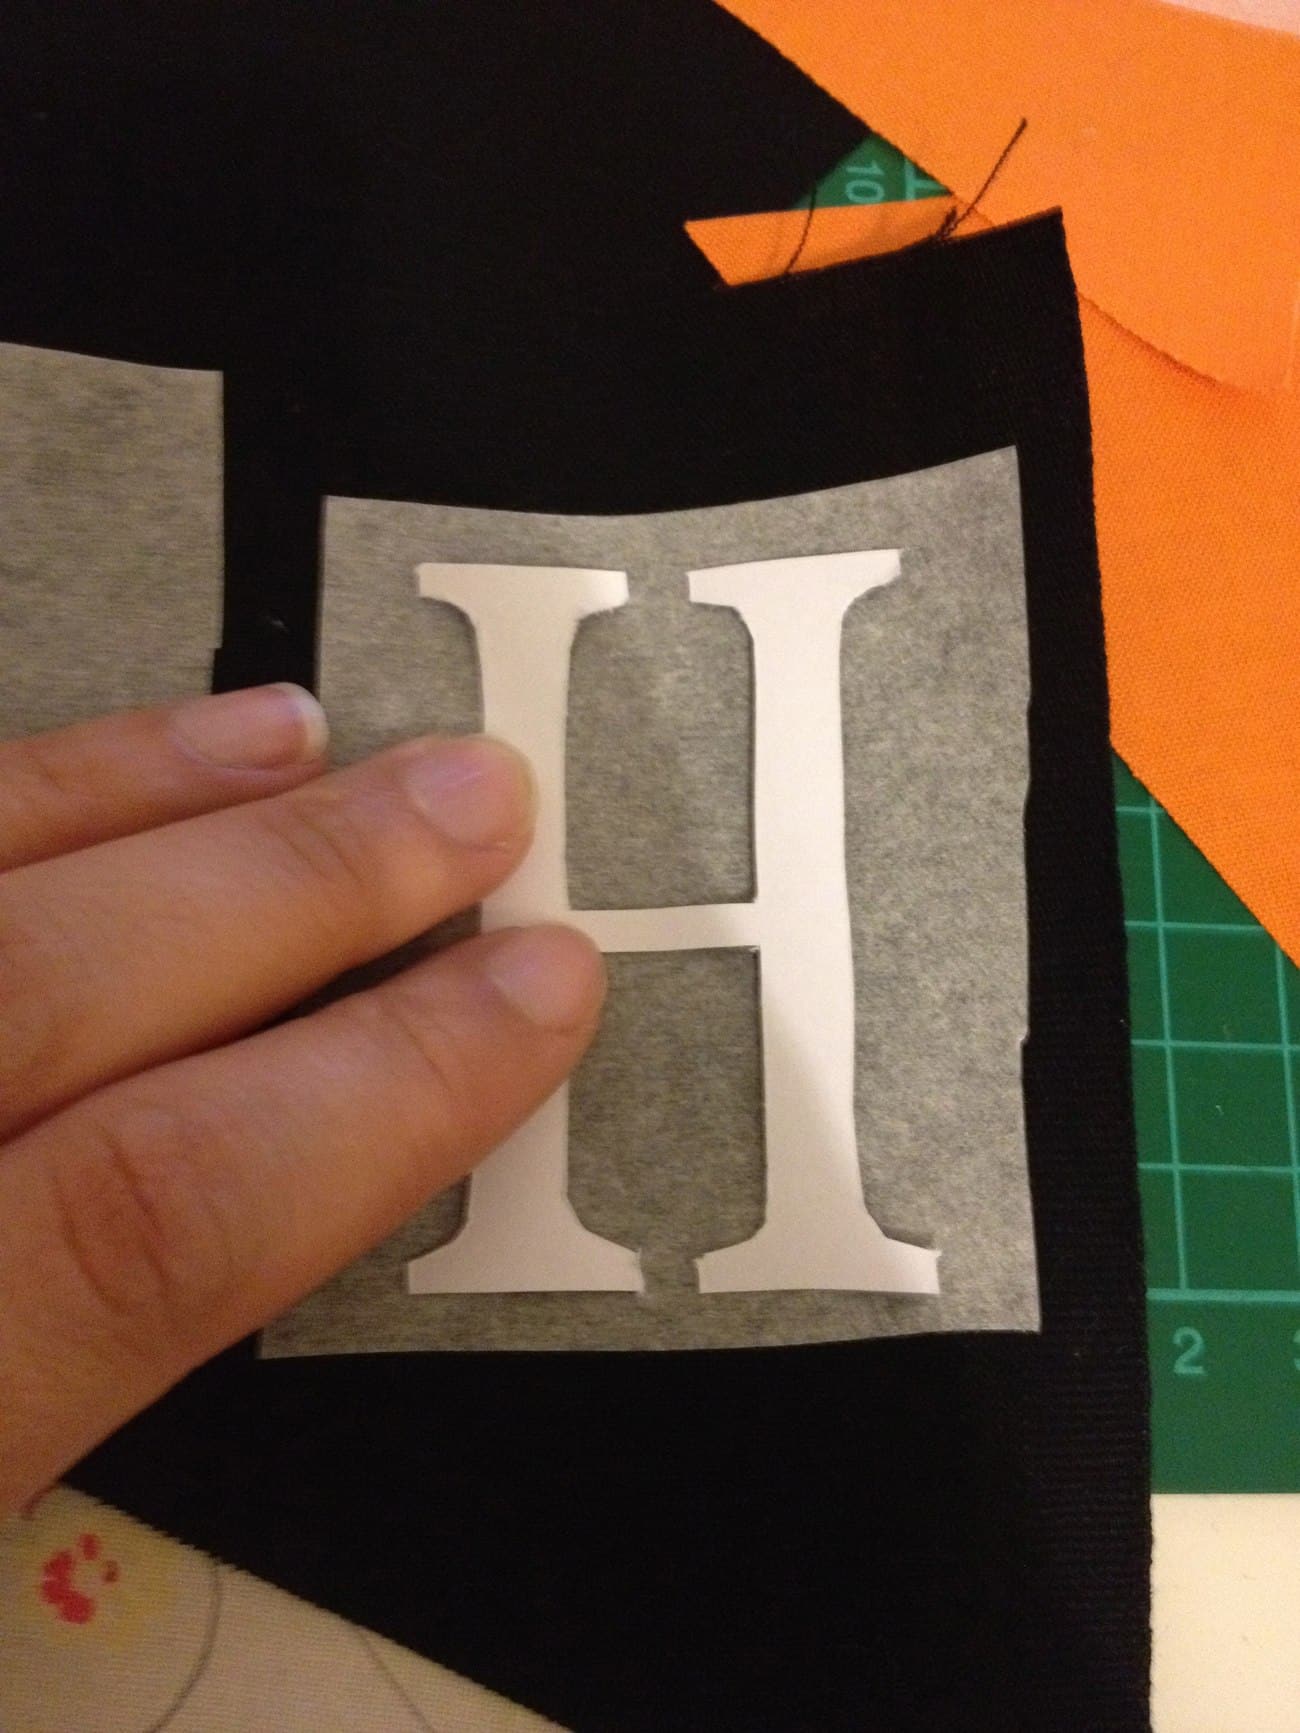 A Halloween enthusiast crafting a "h" shape on fabric, following a bunting tutorial.